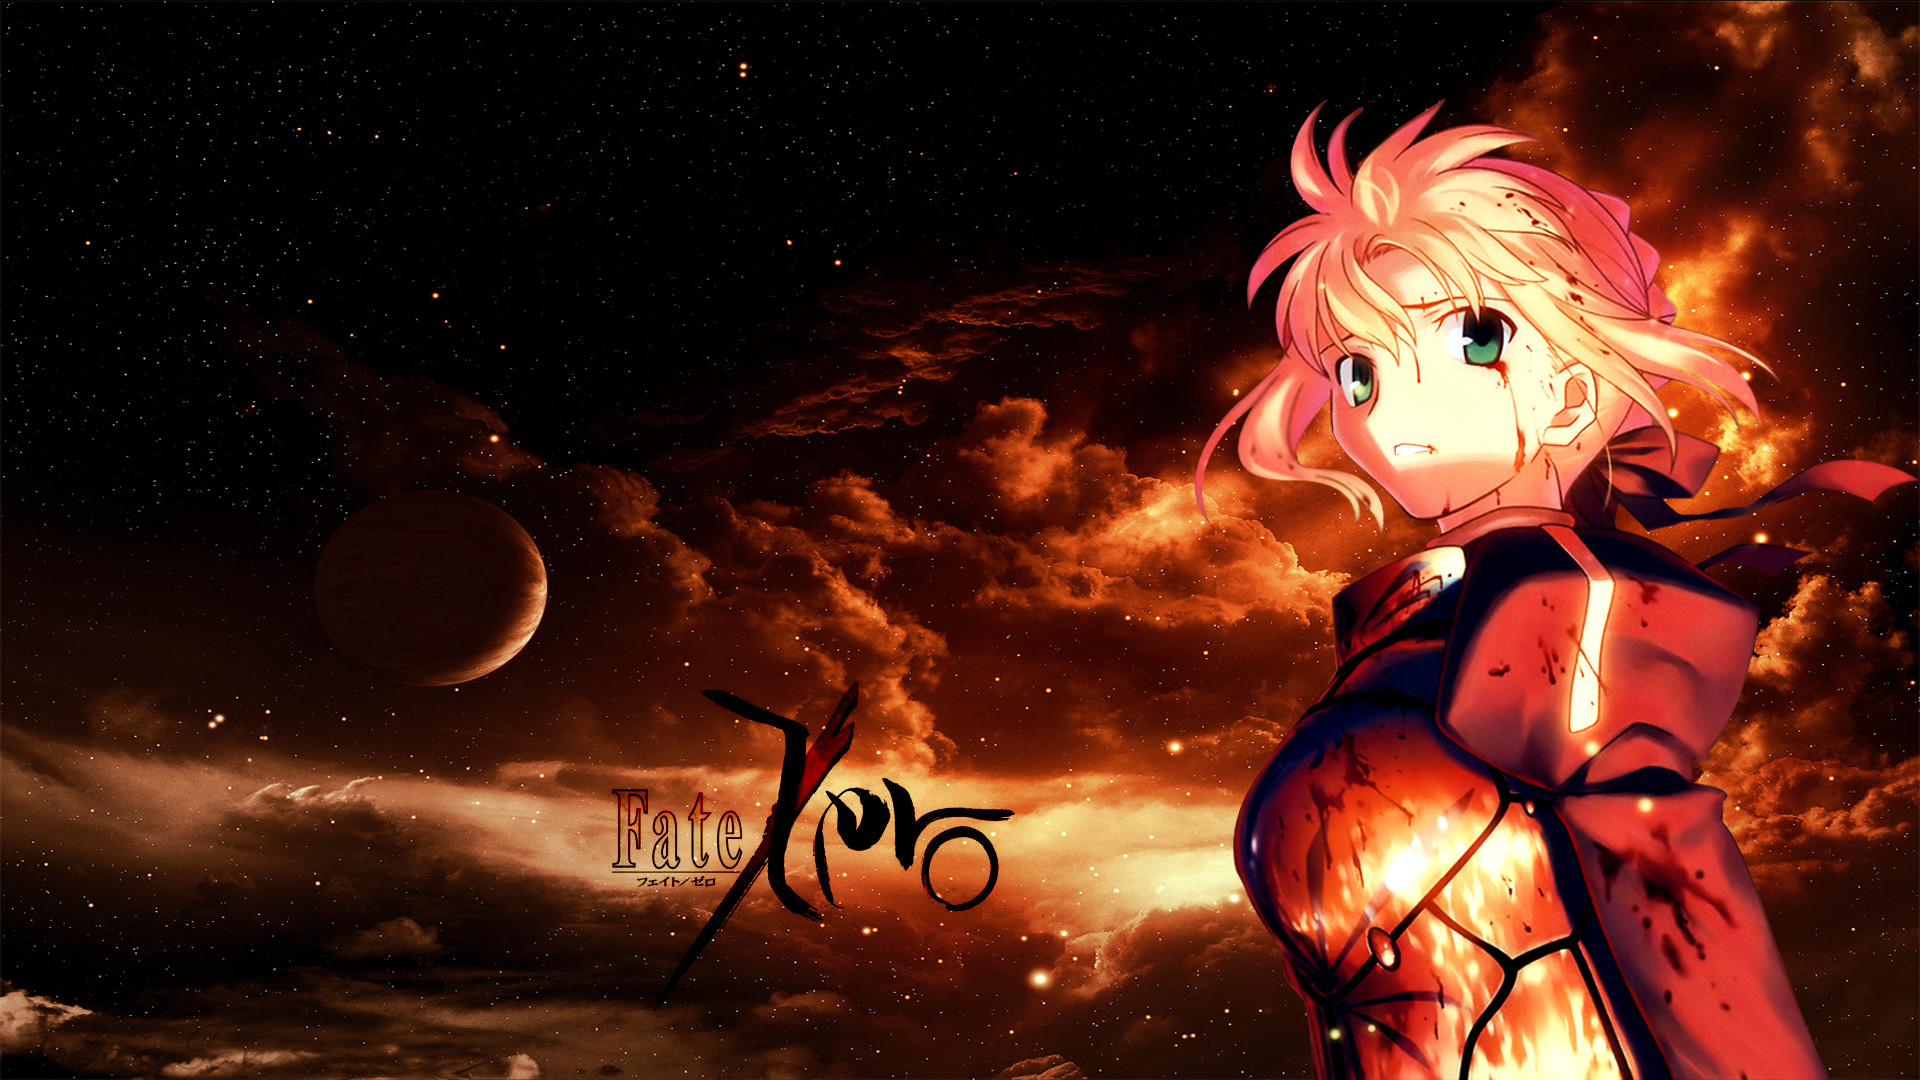 1920x1080 saber from fate zero anime